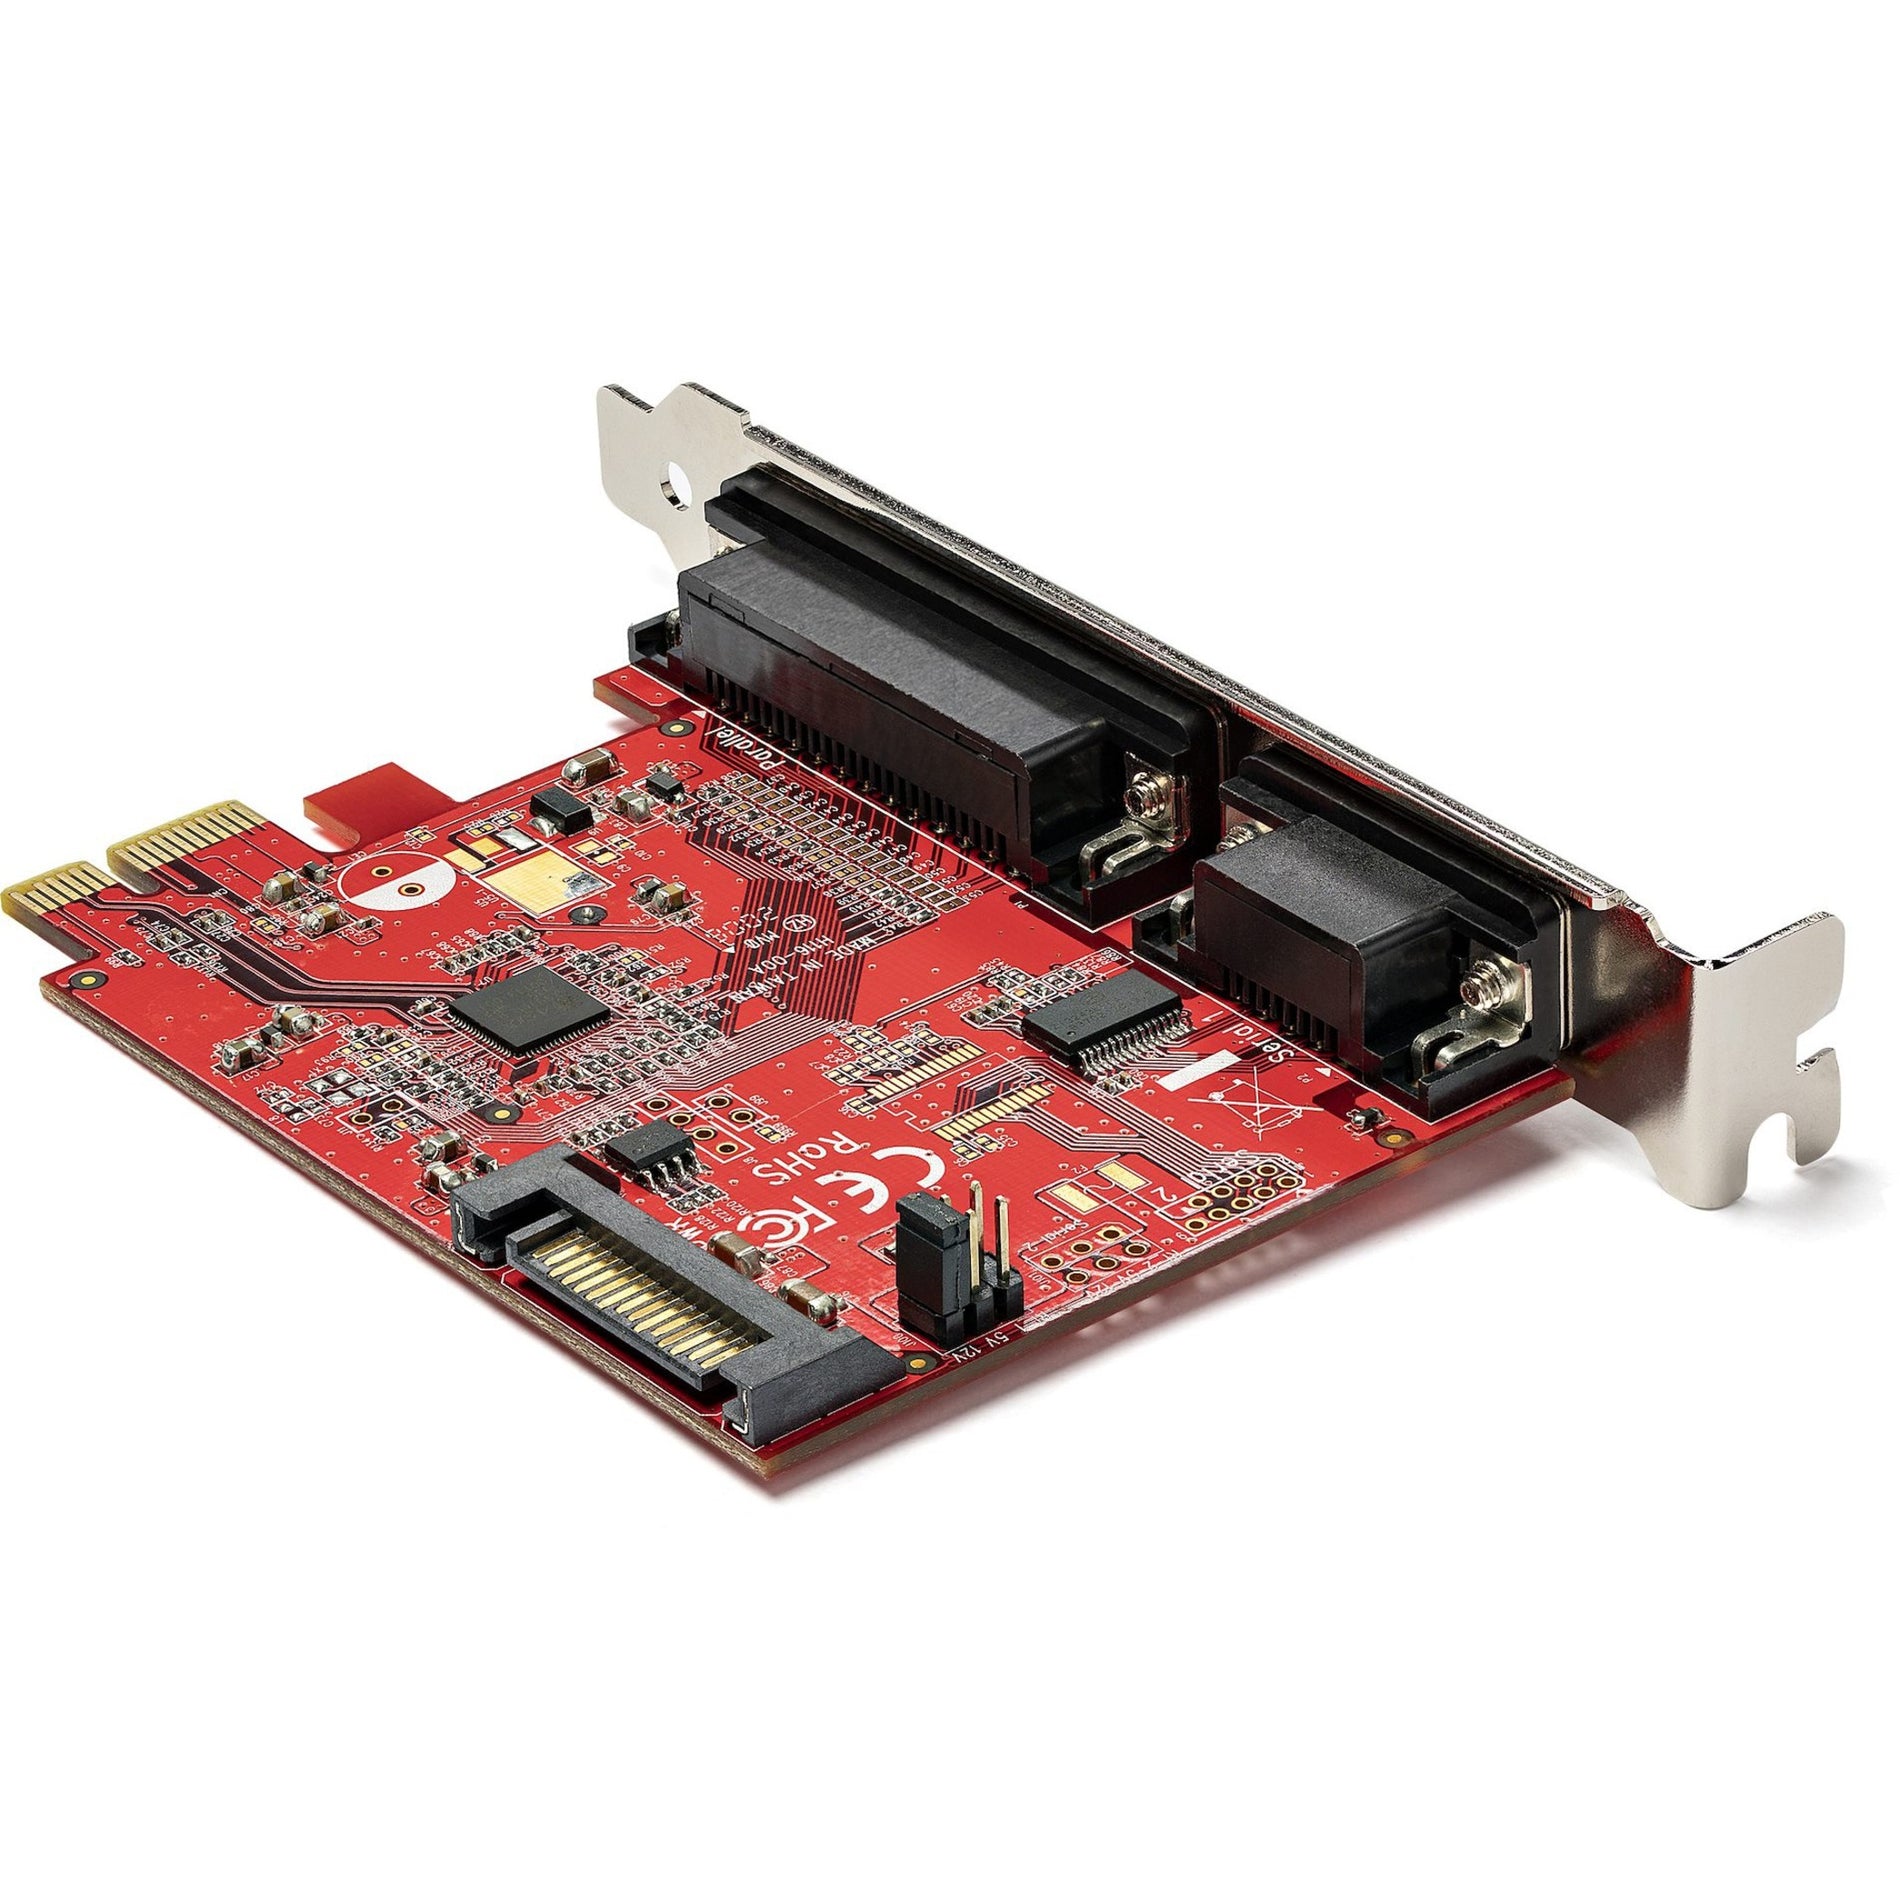 StarTech.com PEX1S1P950 1S1P Native PCI Express Serial Parallel Combo Card with 16C950 UART, Lifetime Warranty, RoHS & WEEE Certified